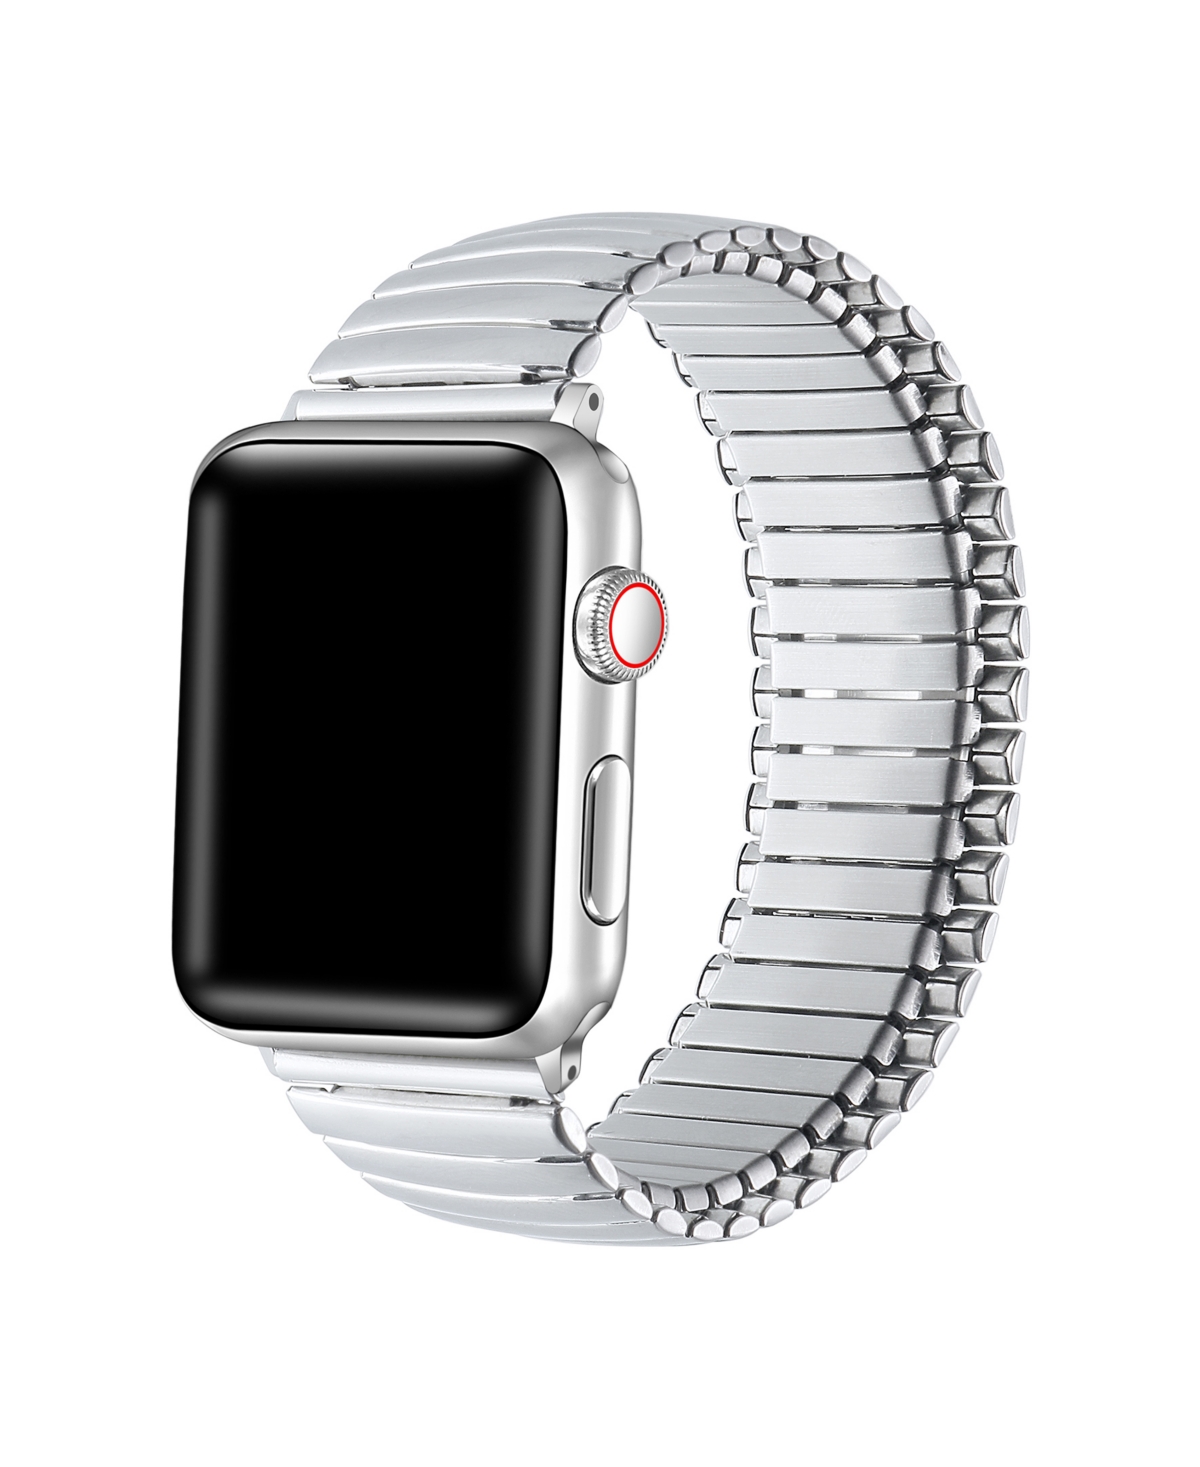 Unisex Slink Silver Stainless Steel Band for Apple Watch Size-38mm,40mm,41mm - Silver